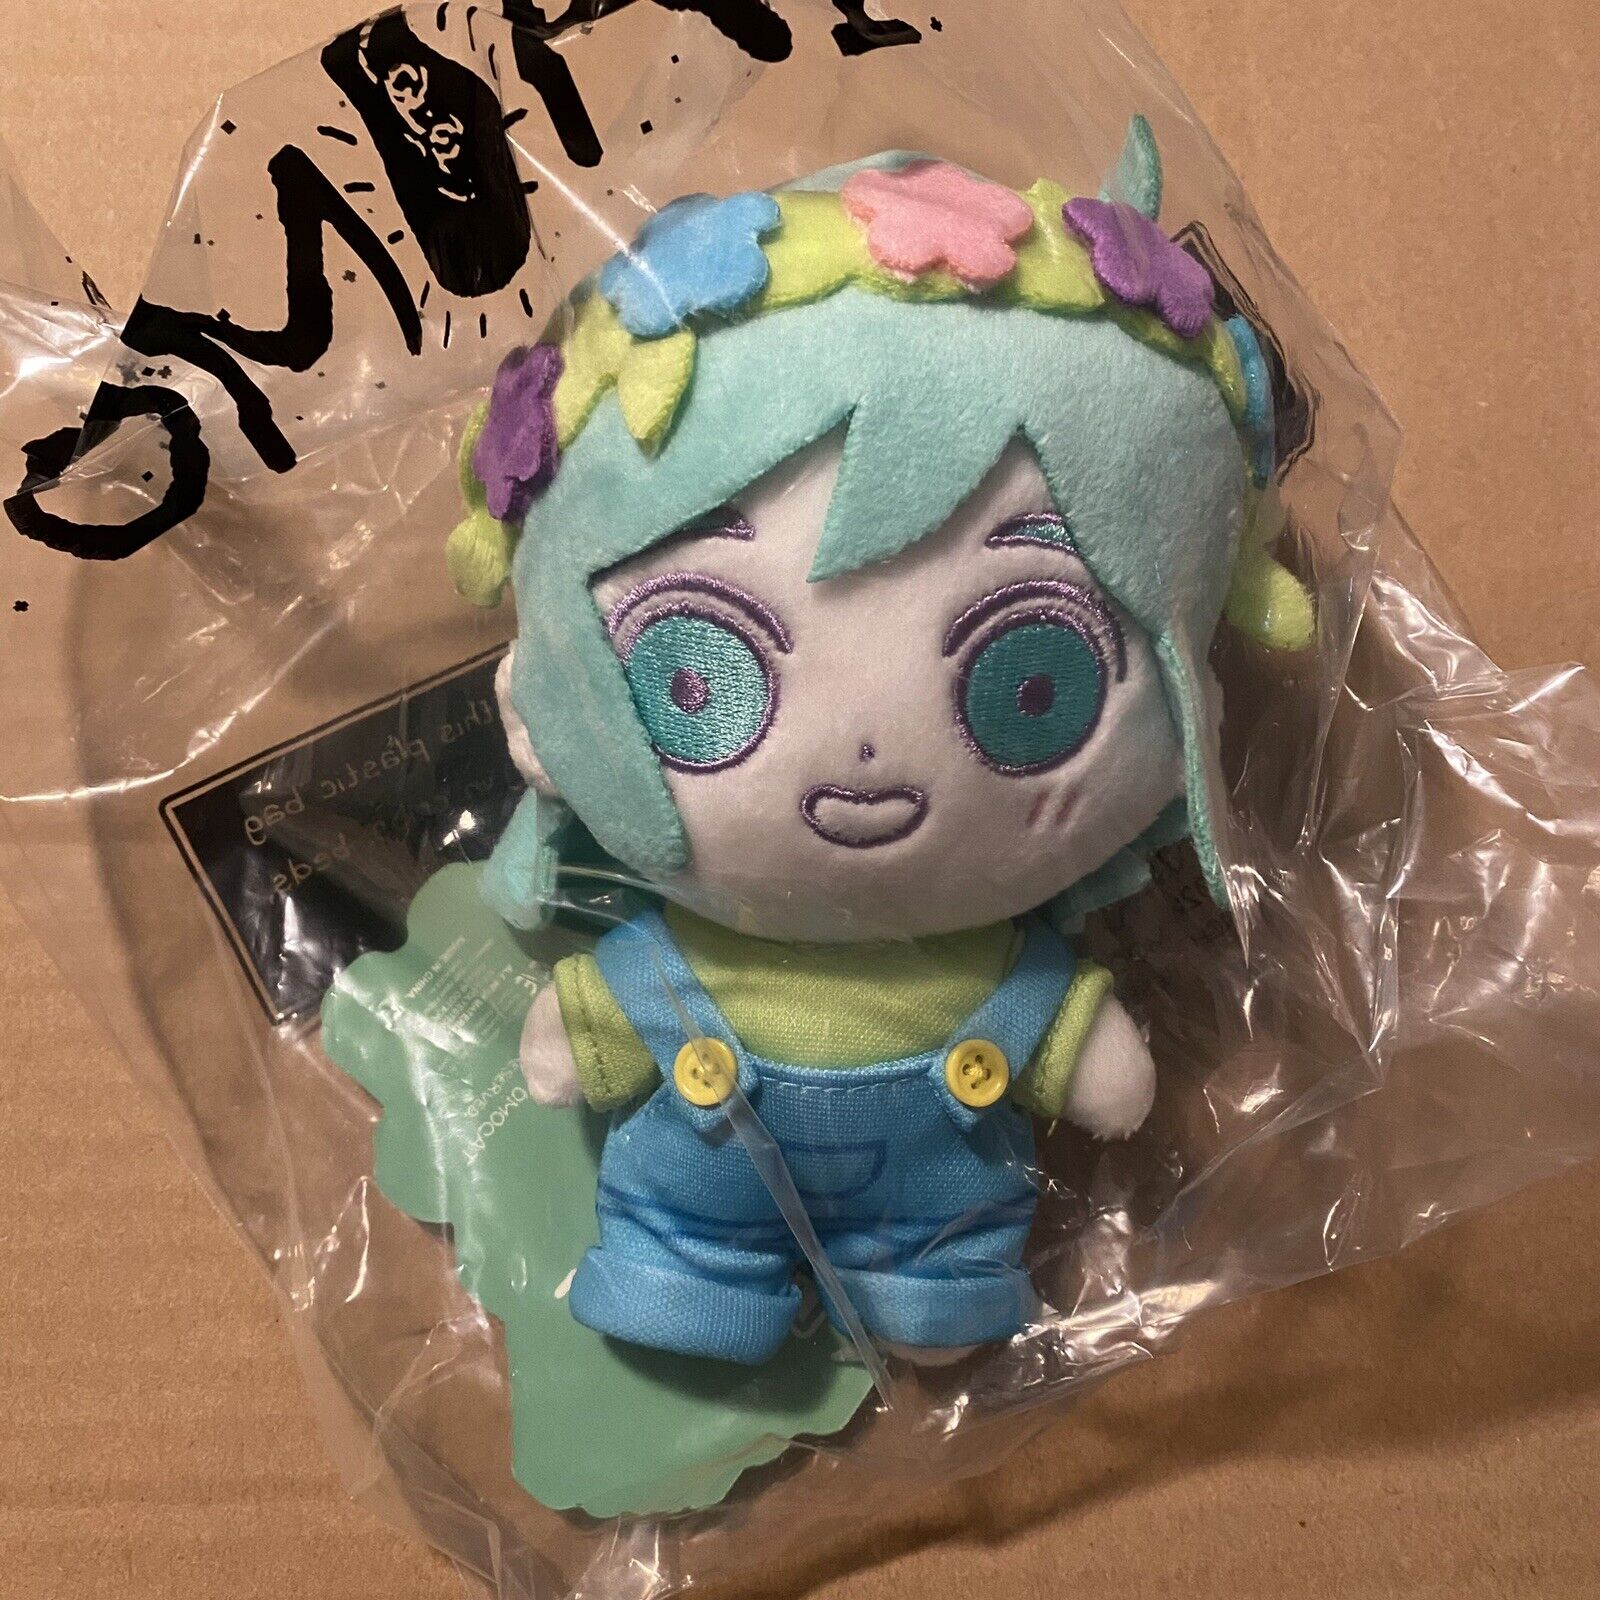 *IN HAND* Authentic Official OMOCAT Omori Basil Plush Doll Brand New Unopened